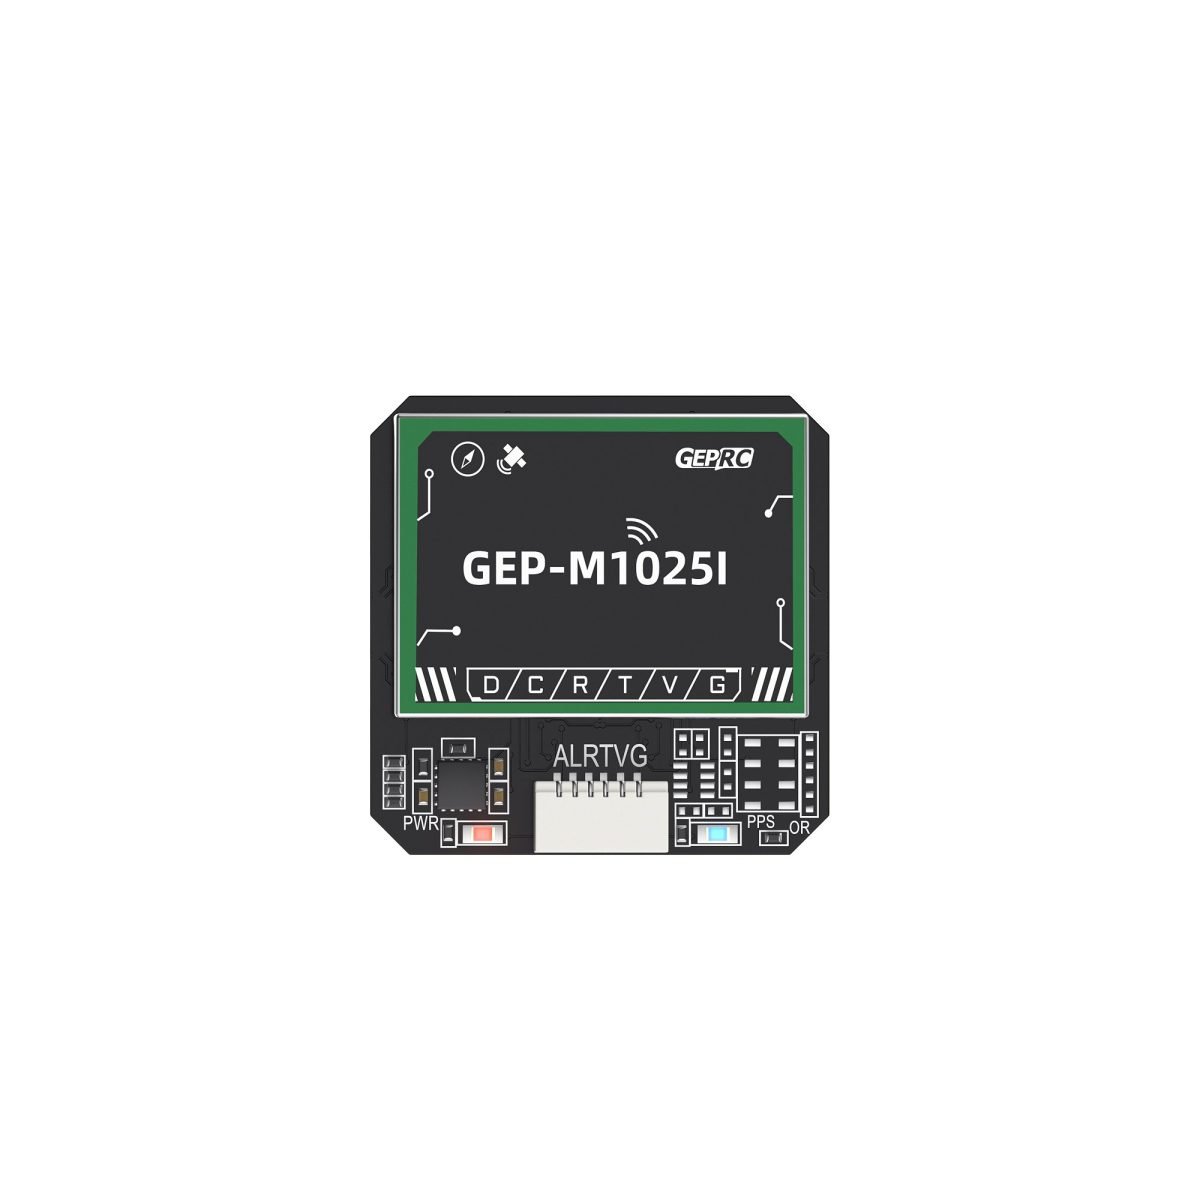 GEPRC GEP-M1025I GPS Module with Compass (IST3810)